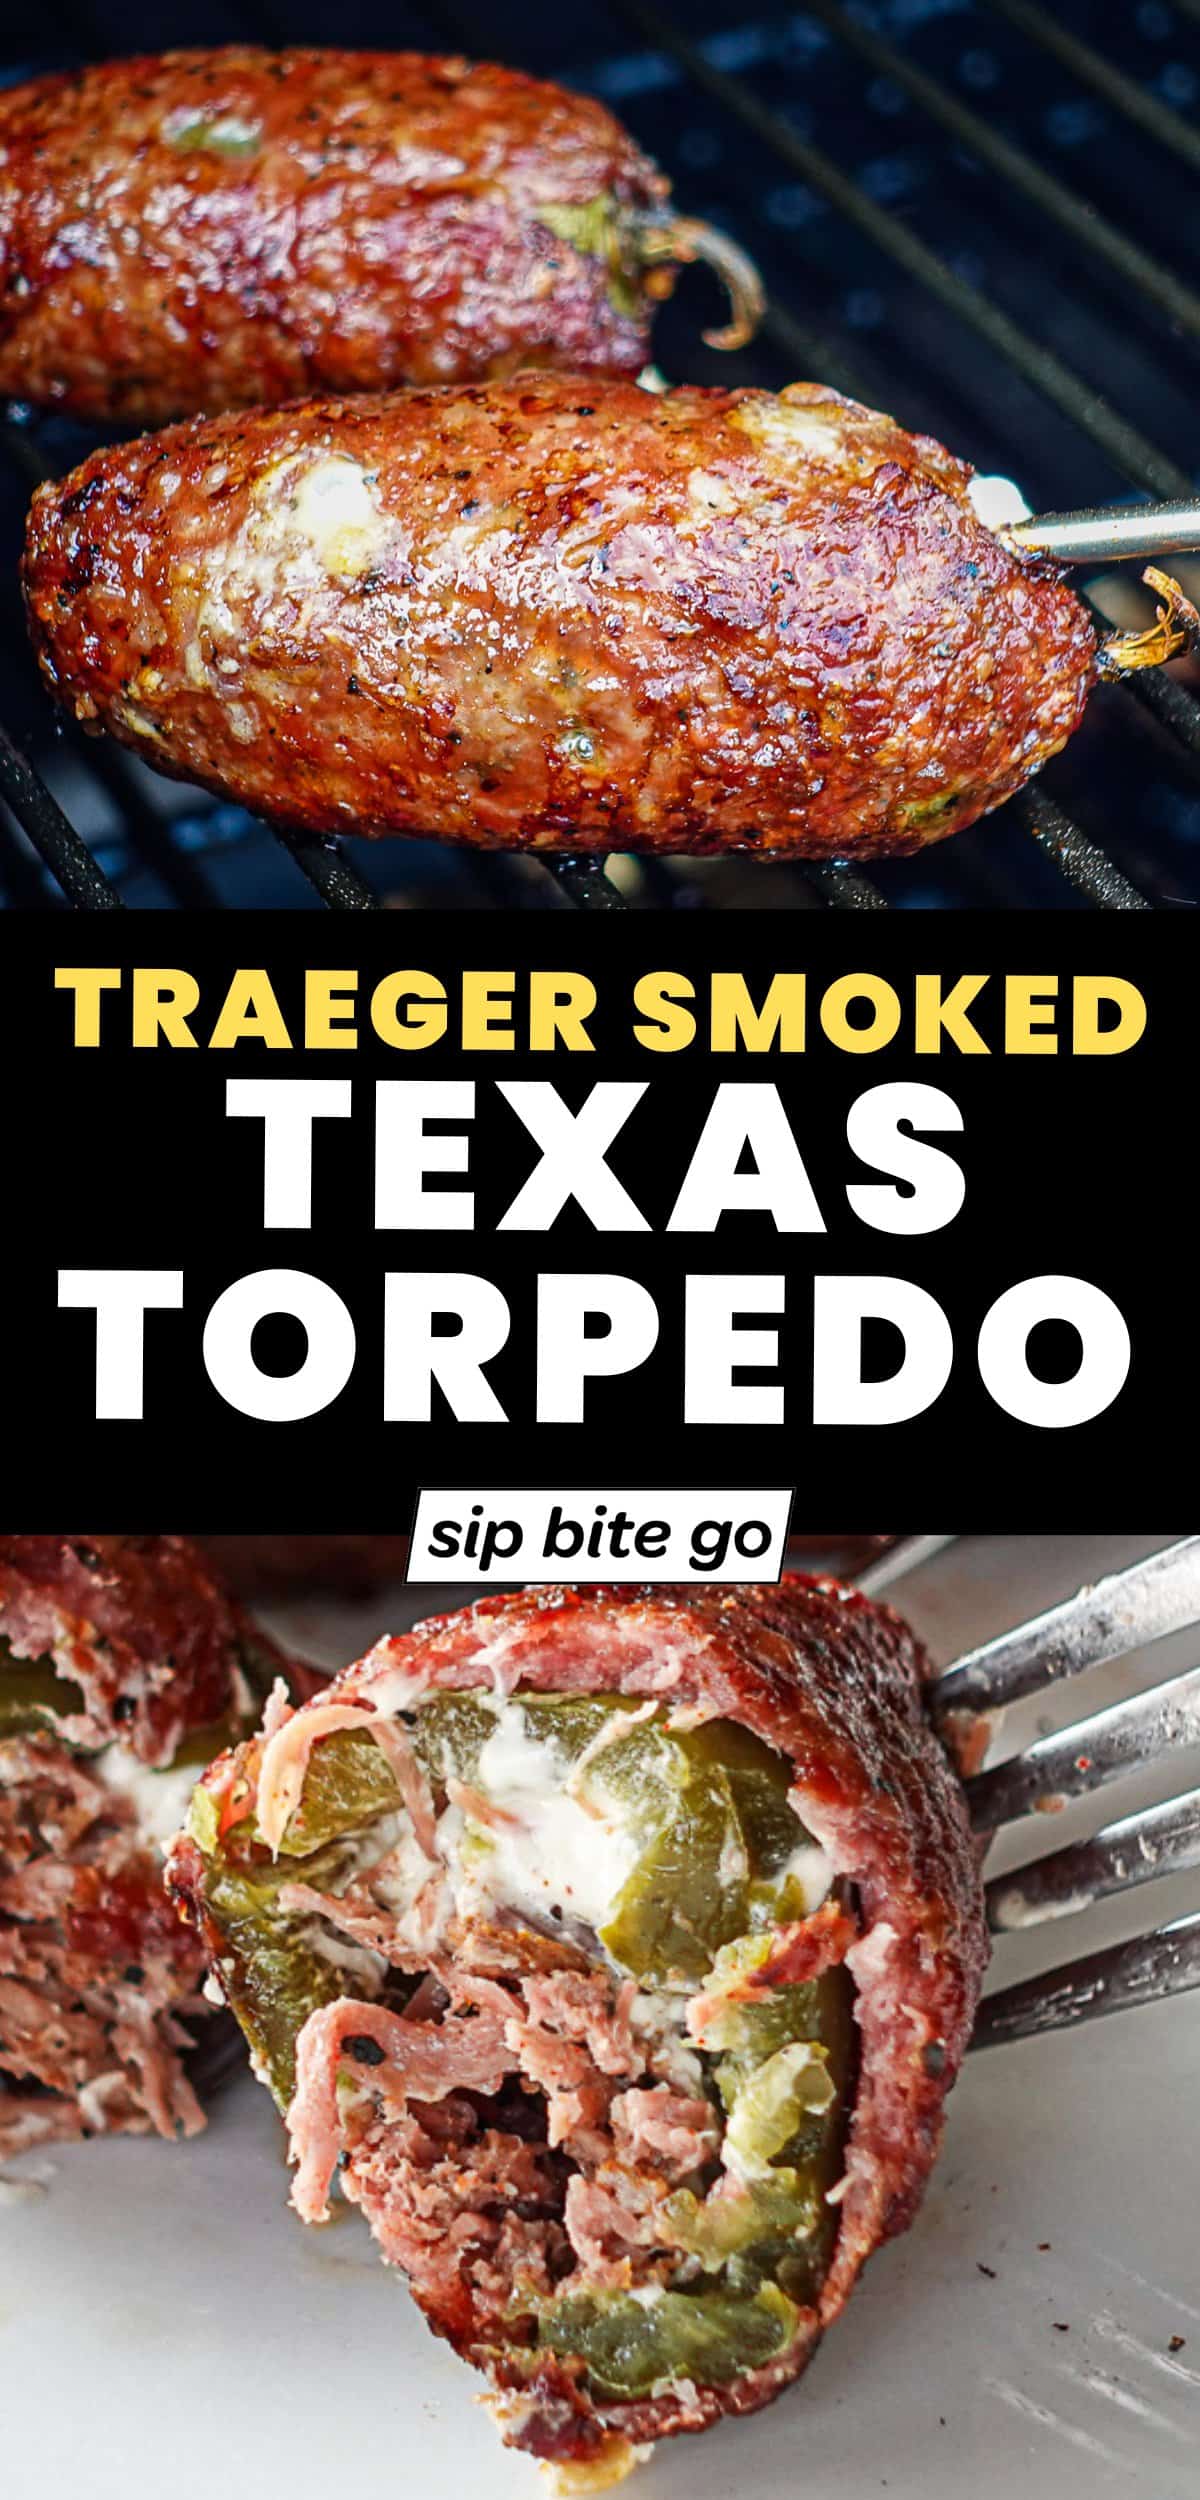 Traeger Smoked Texas Torpedoes Brisket Jalapeno Poppers